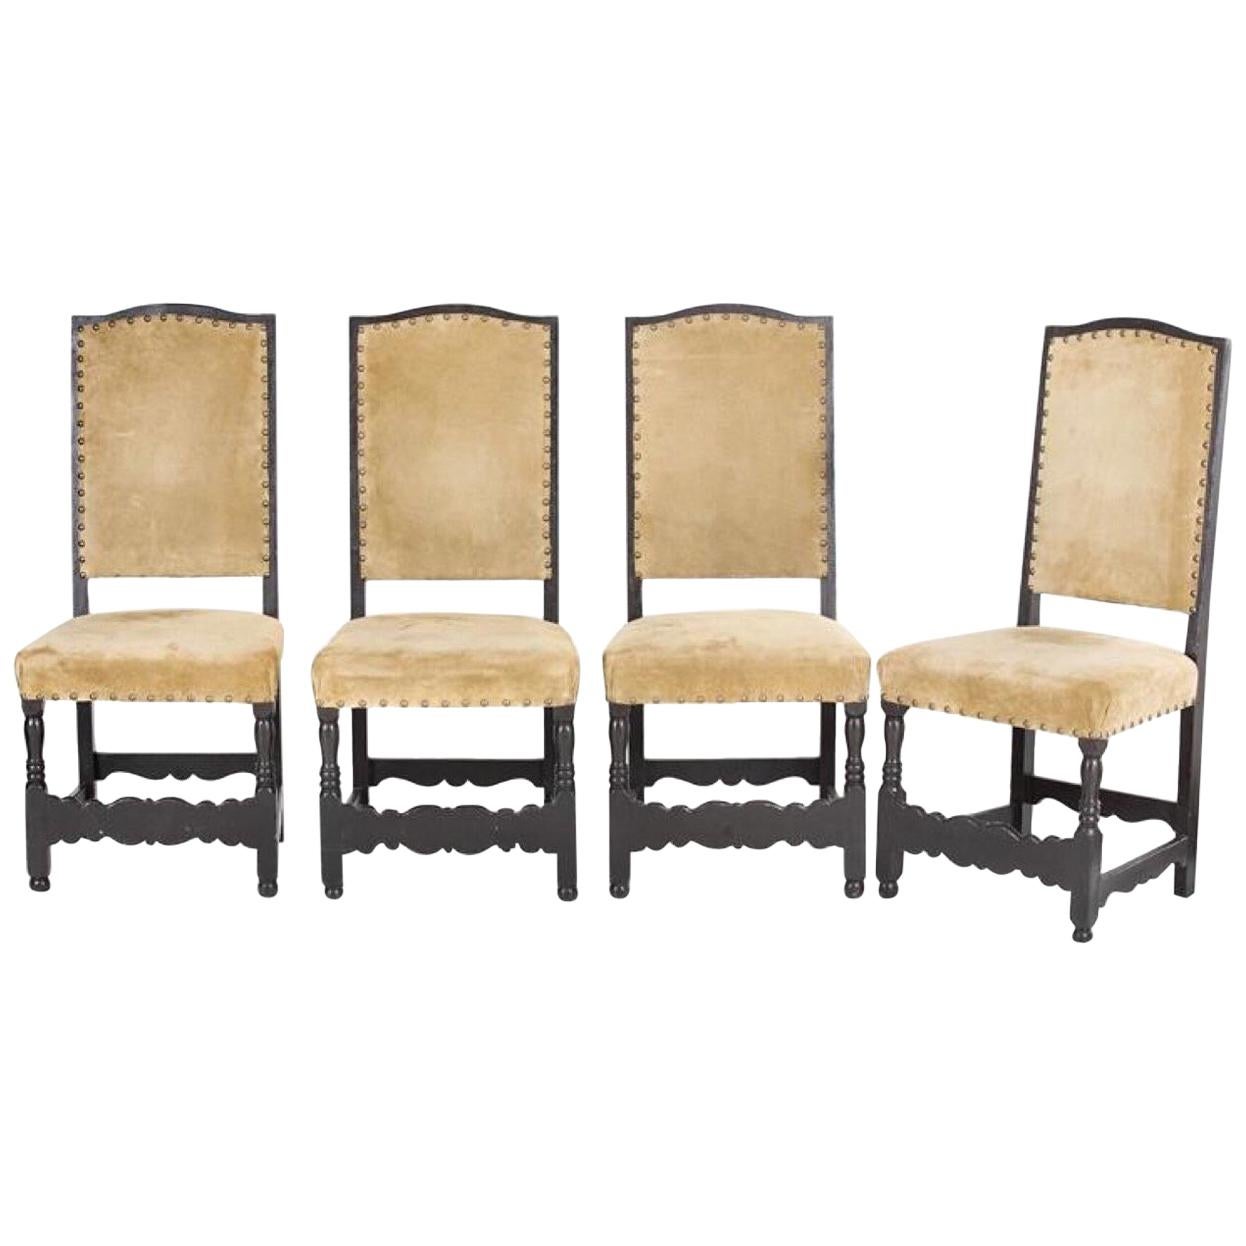 Four Provincial Post Chairs, Alpine, 18th Century Solid Coniferous Wood